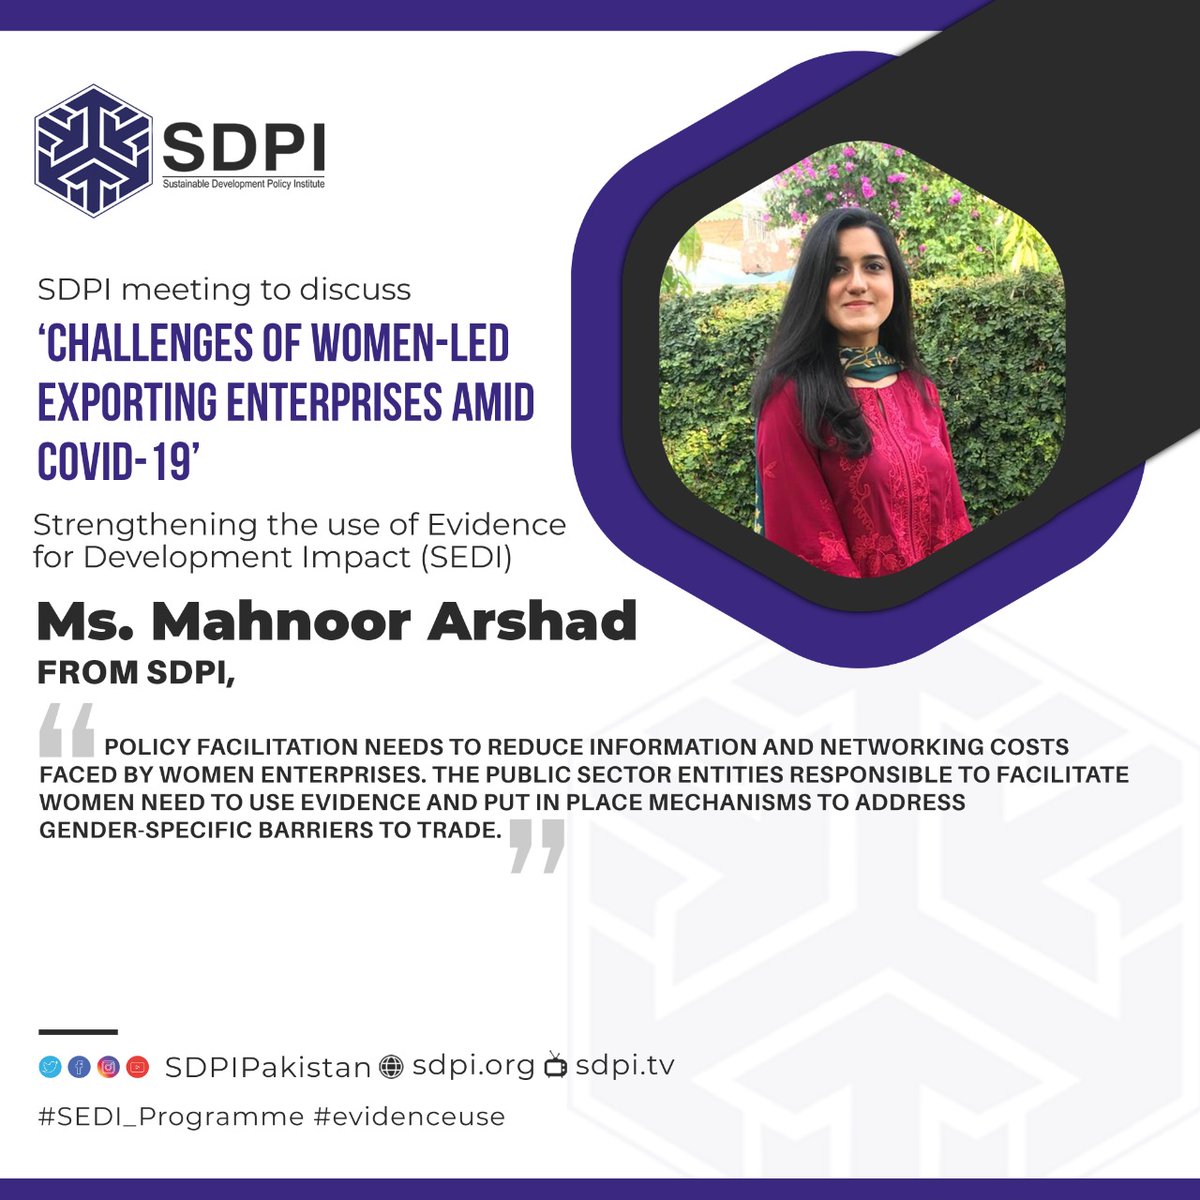 Policy facilitation needs to reduce information and networking costs faced by women #enterprises, says Ms @mahnoorm10 while moderating session 

#SEDI_Programme #evidenceuse   

More at: nawaiwaqt.com.pk/E-Paper/islama…